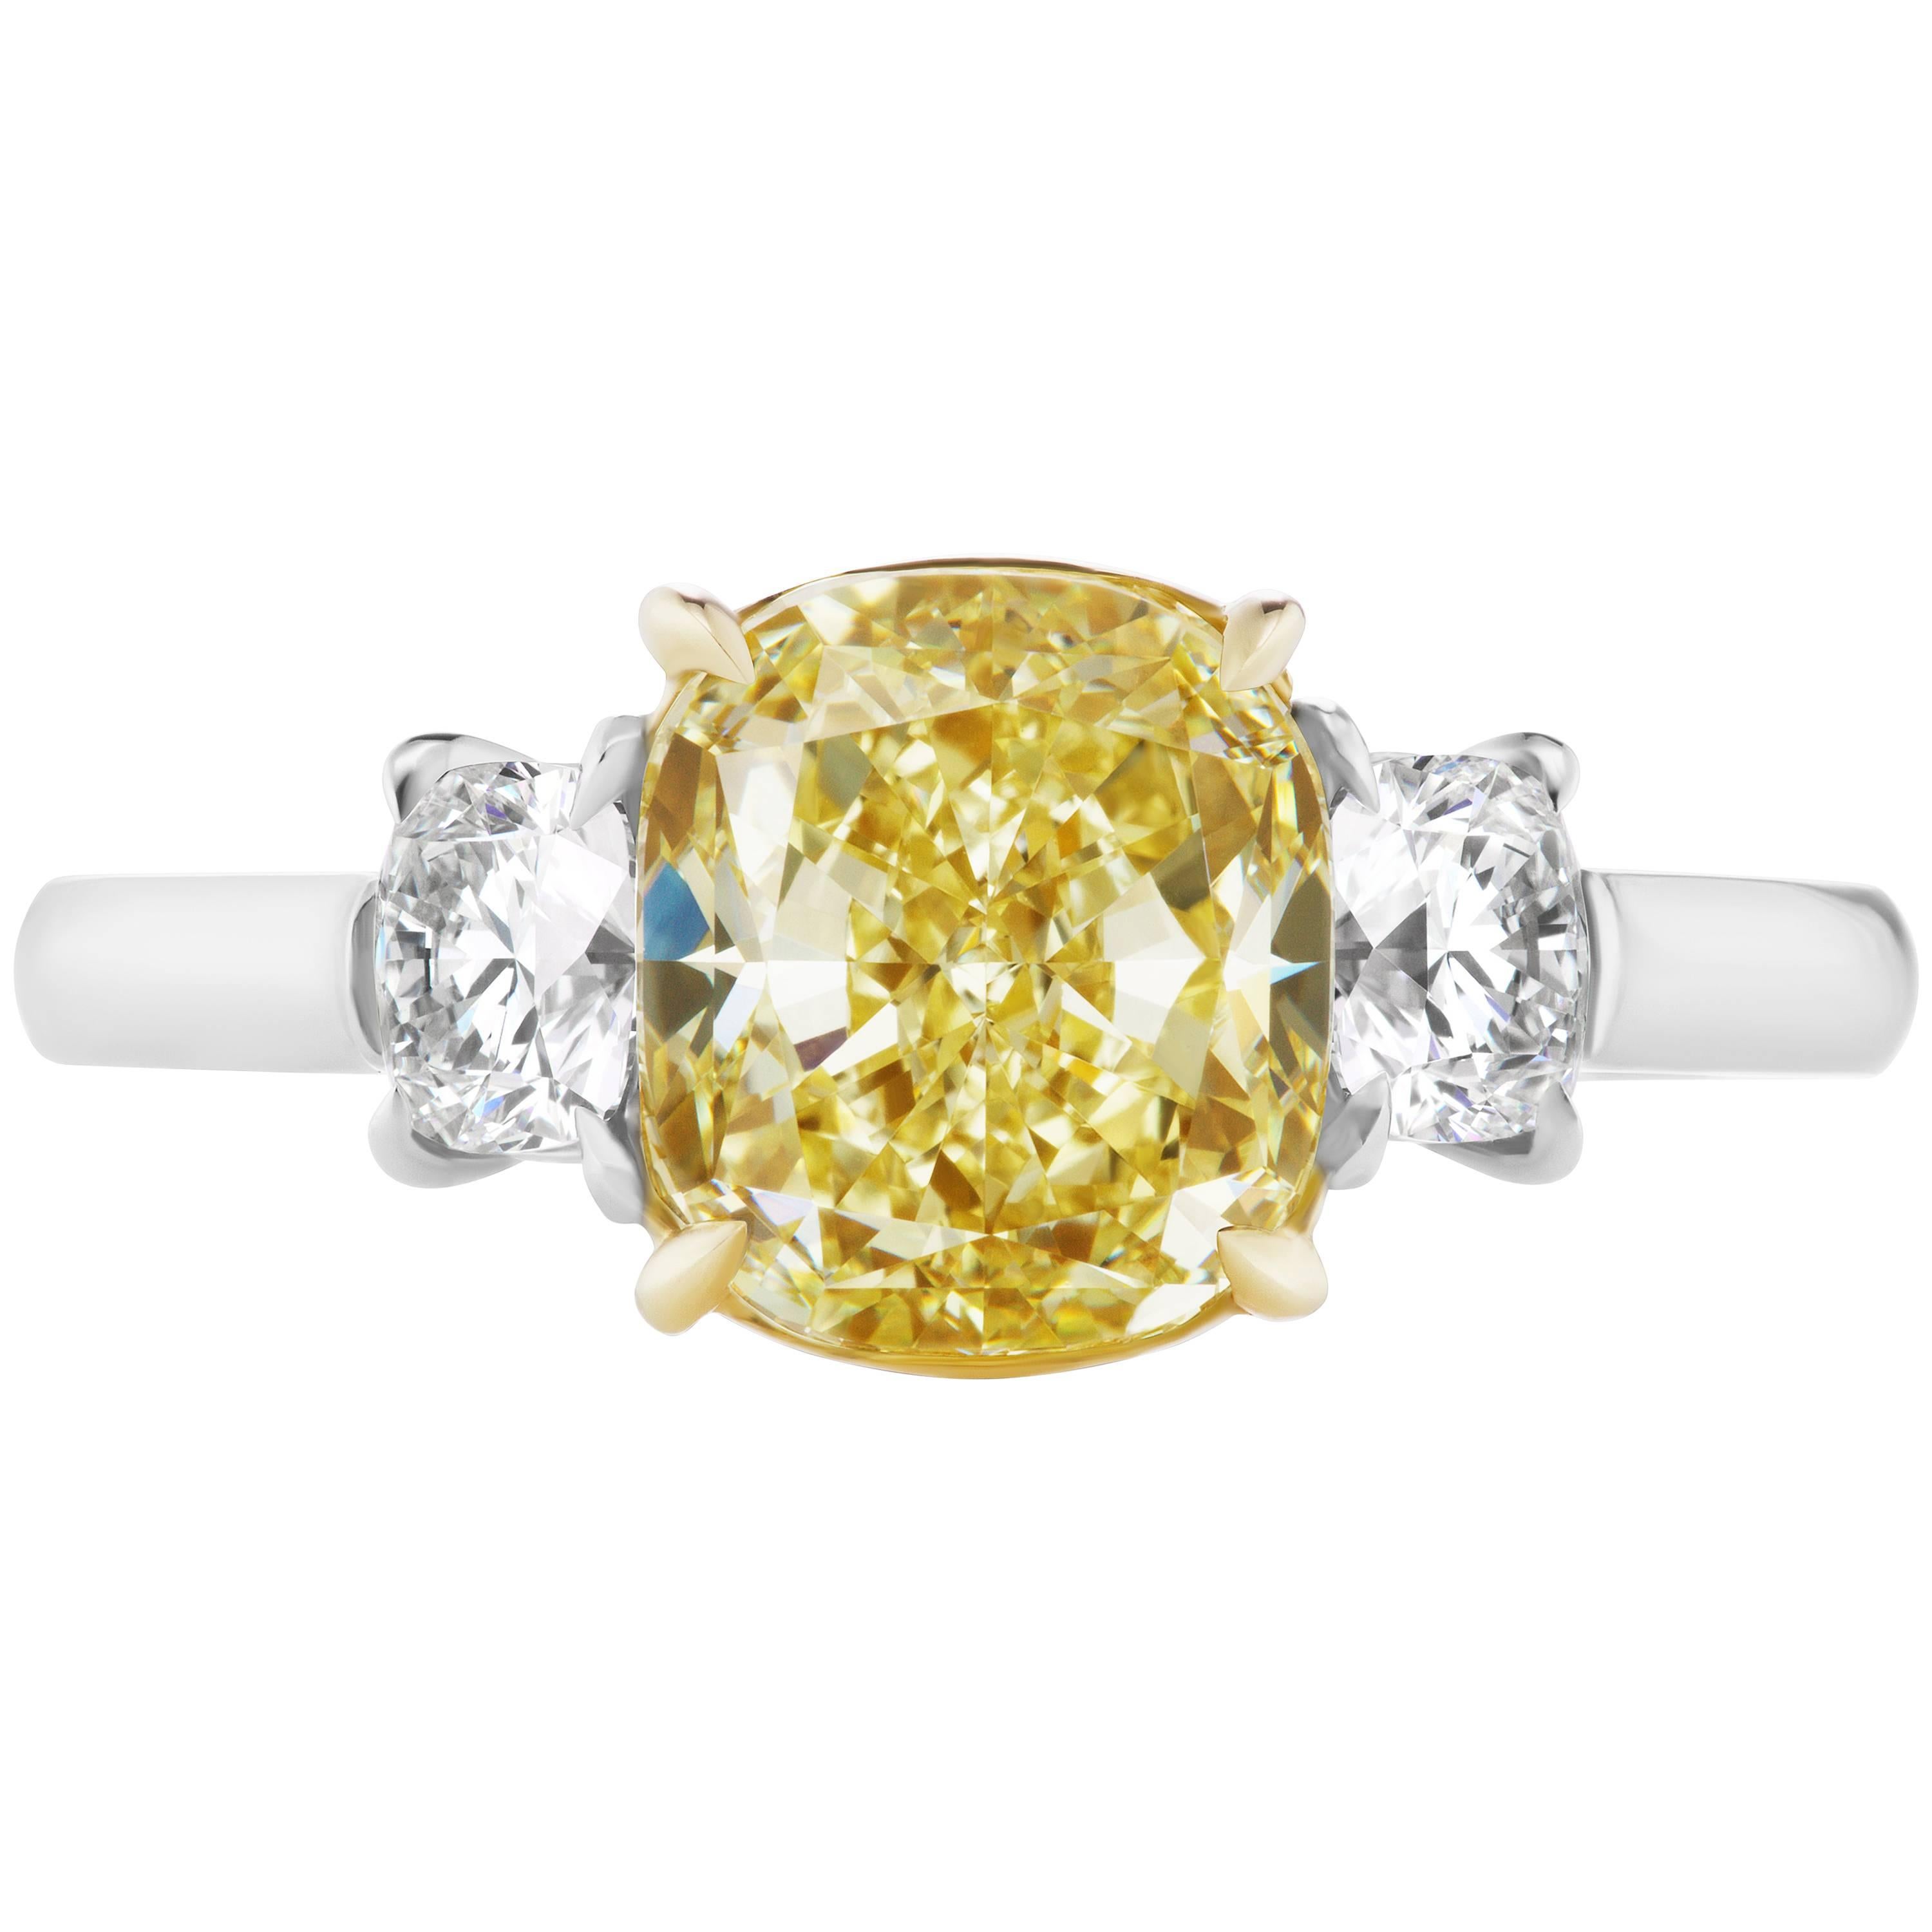 Scarselli GIA Certified 2.5 Carat Yellow Cushion Cut Diamond and Engagement Ring